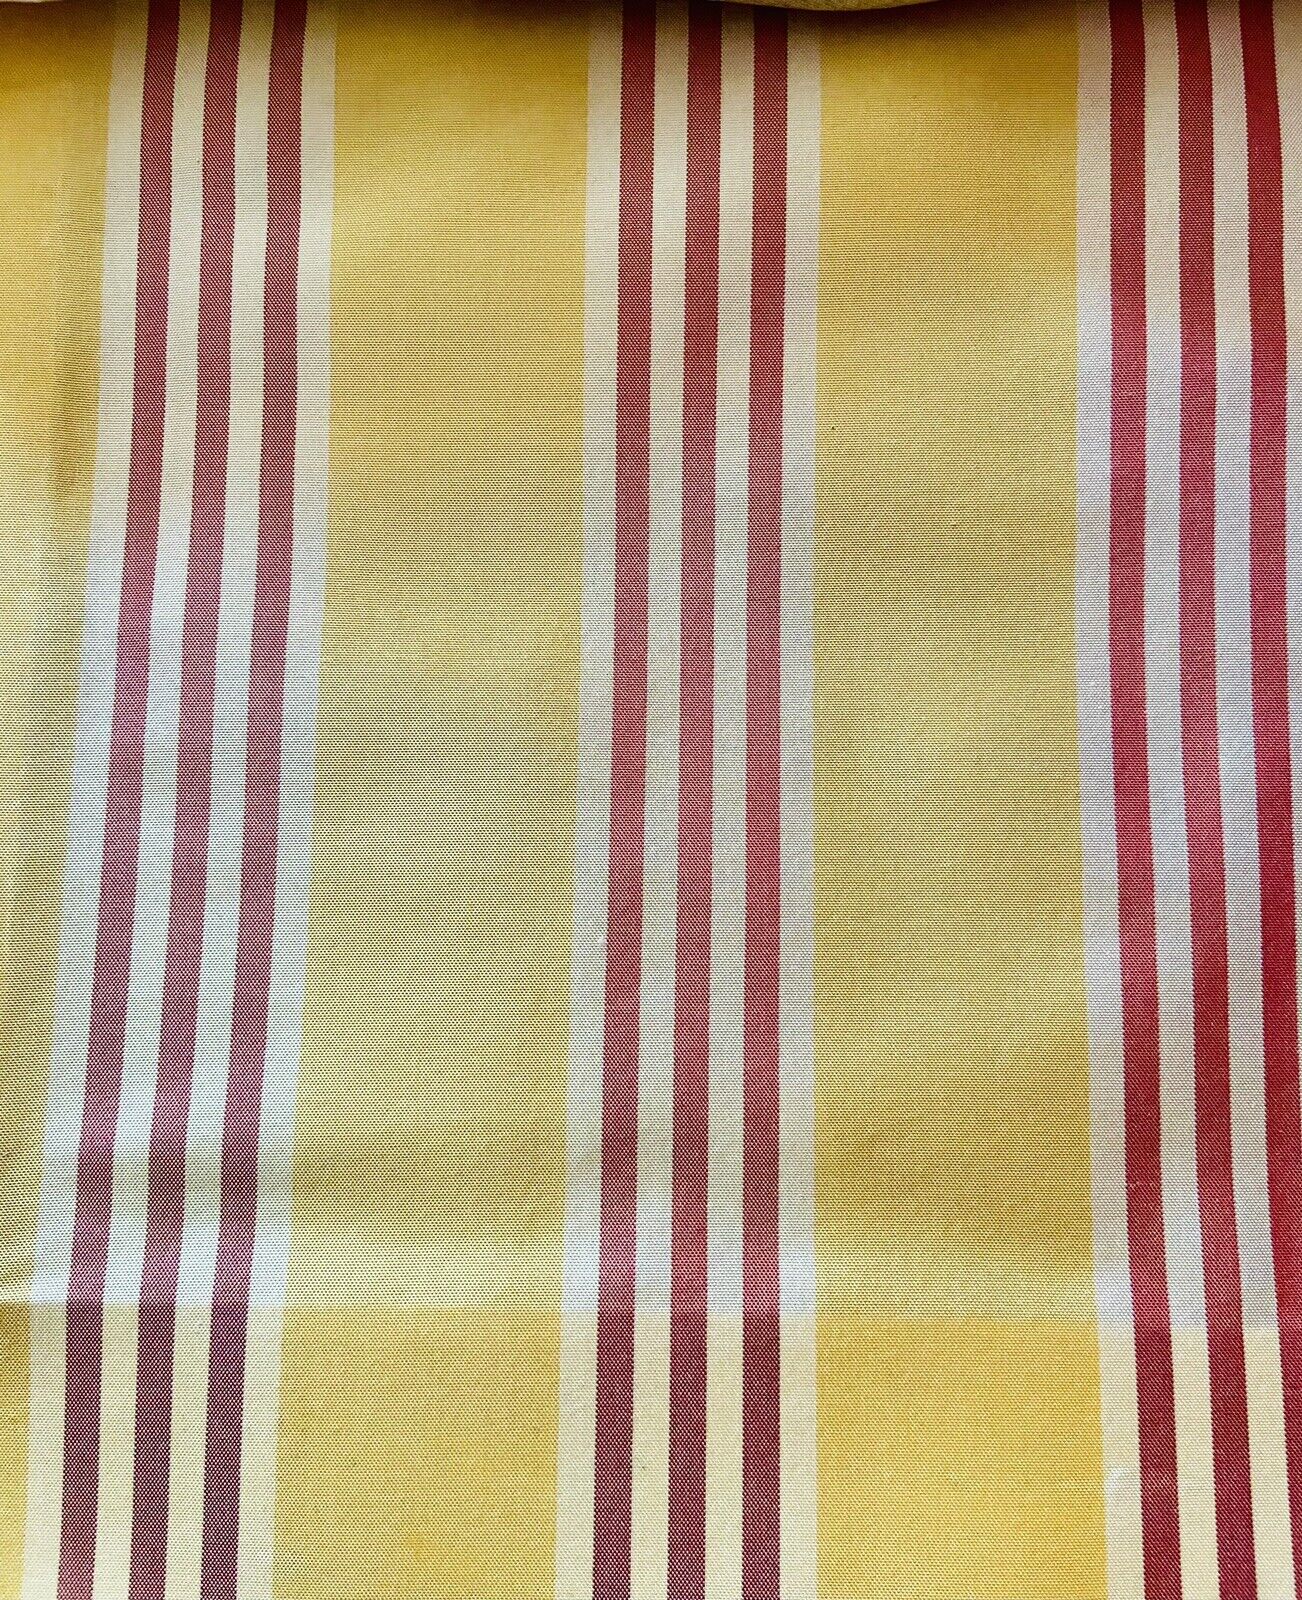 Kravet Couture Curley Striped Dupioni 100% Silk Fabric. By The Yard